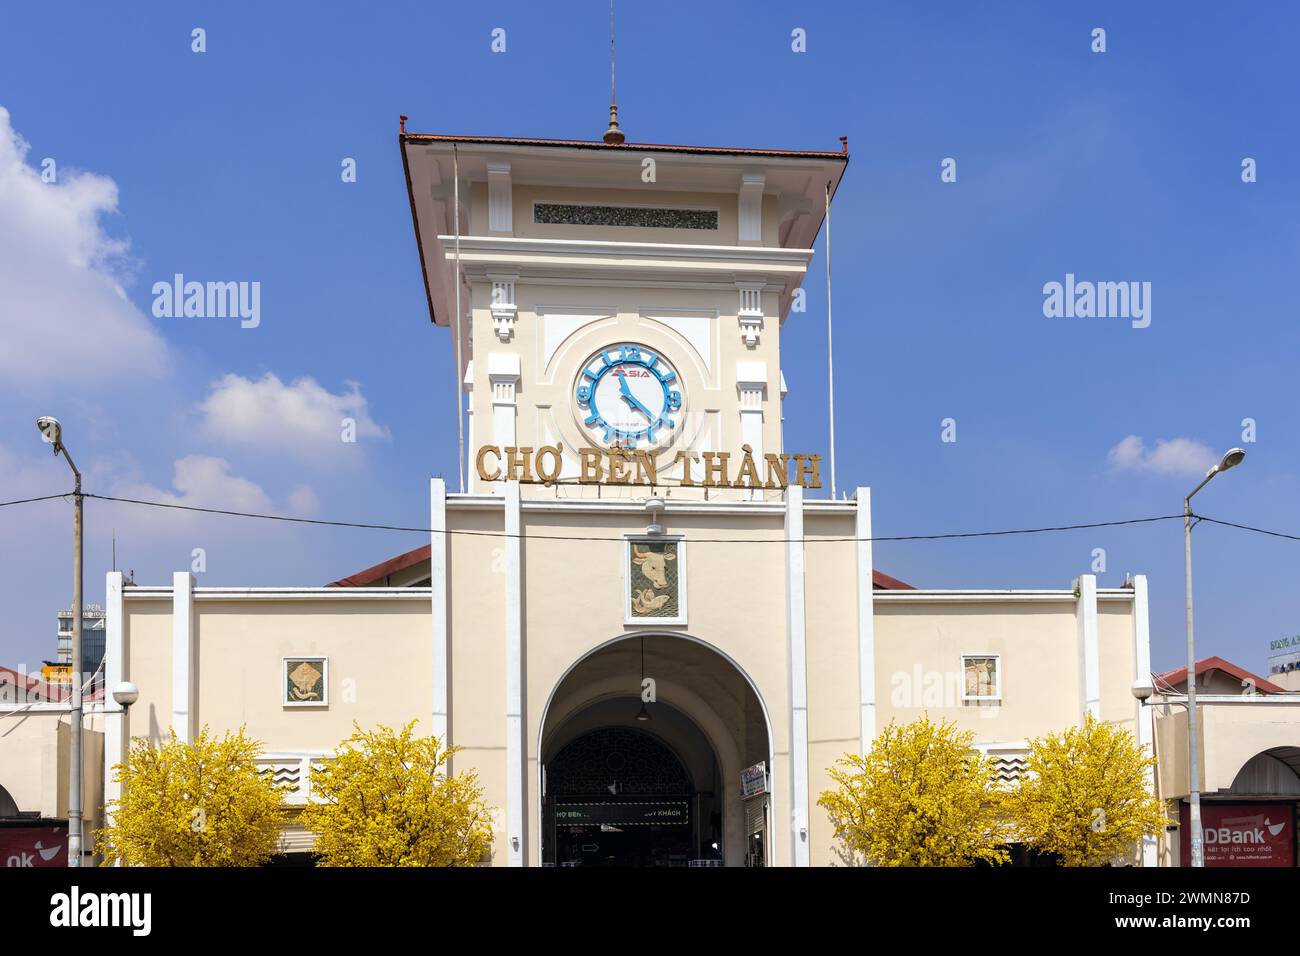 Facade and main entrance of Ben Thanh Market in Ho Chi Minh City, Saigon. The market is one of the top attractions of Ho Chi Minh City. Stock Photo